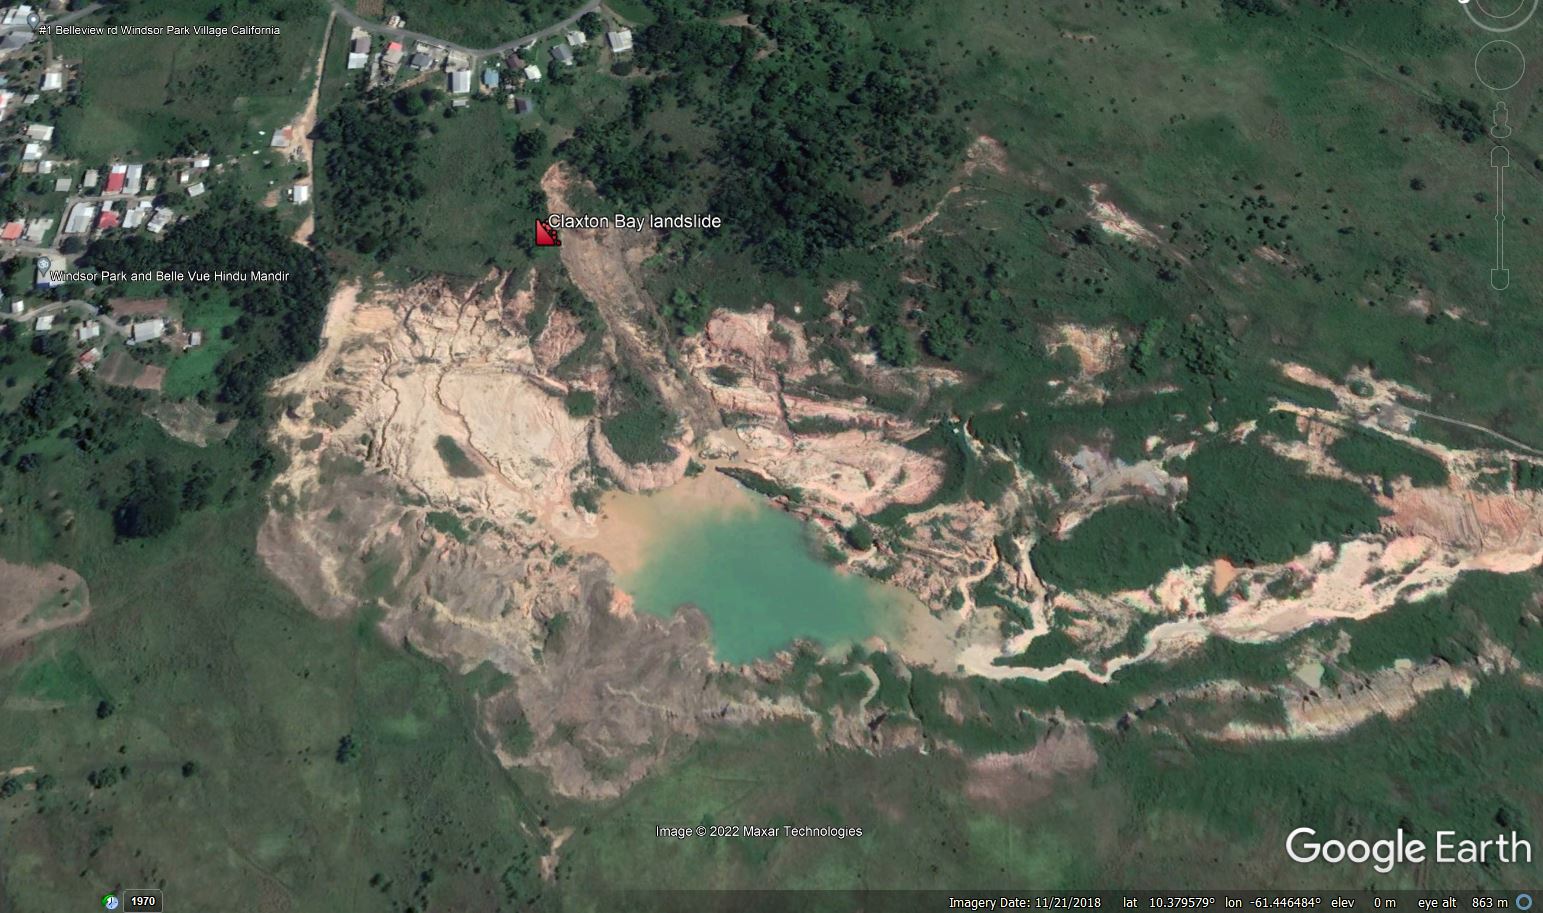 Google Earth image of the site of the Claxton Bay landslide in Trinidad, collected in November 2018, before the landslide retrogressed to affect the houses.